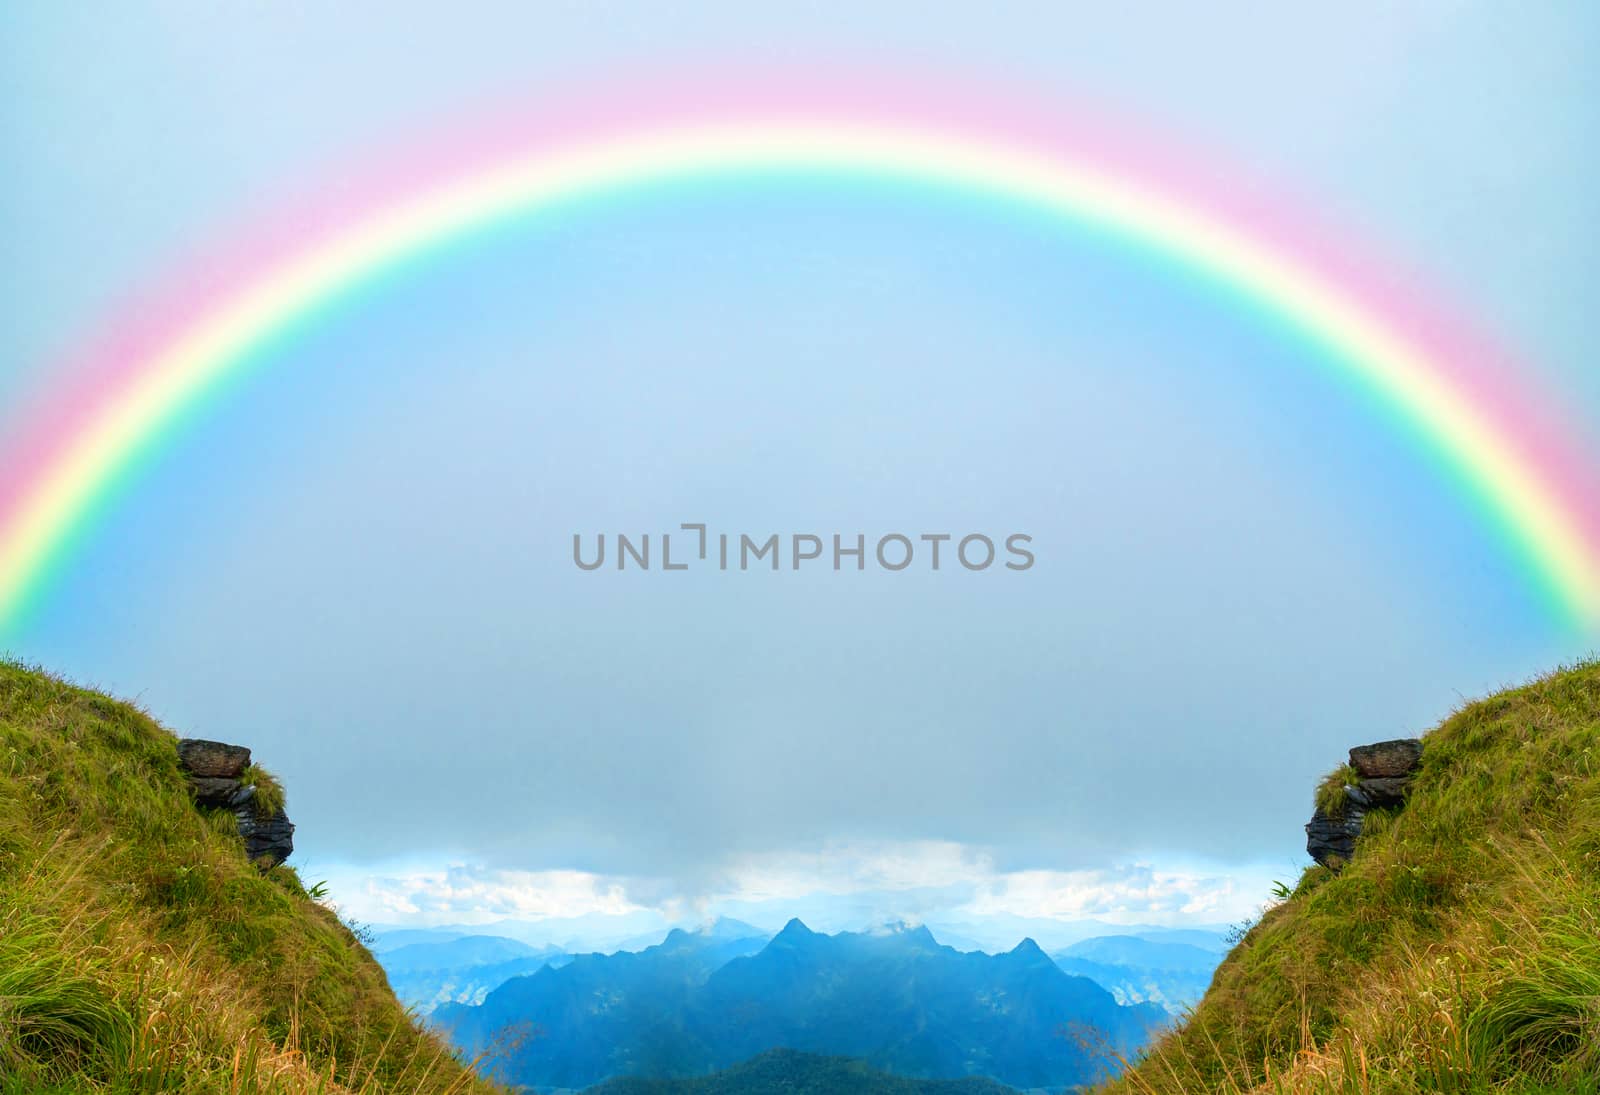 Two mountain peaks with a rainbow in the middle